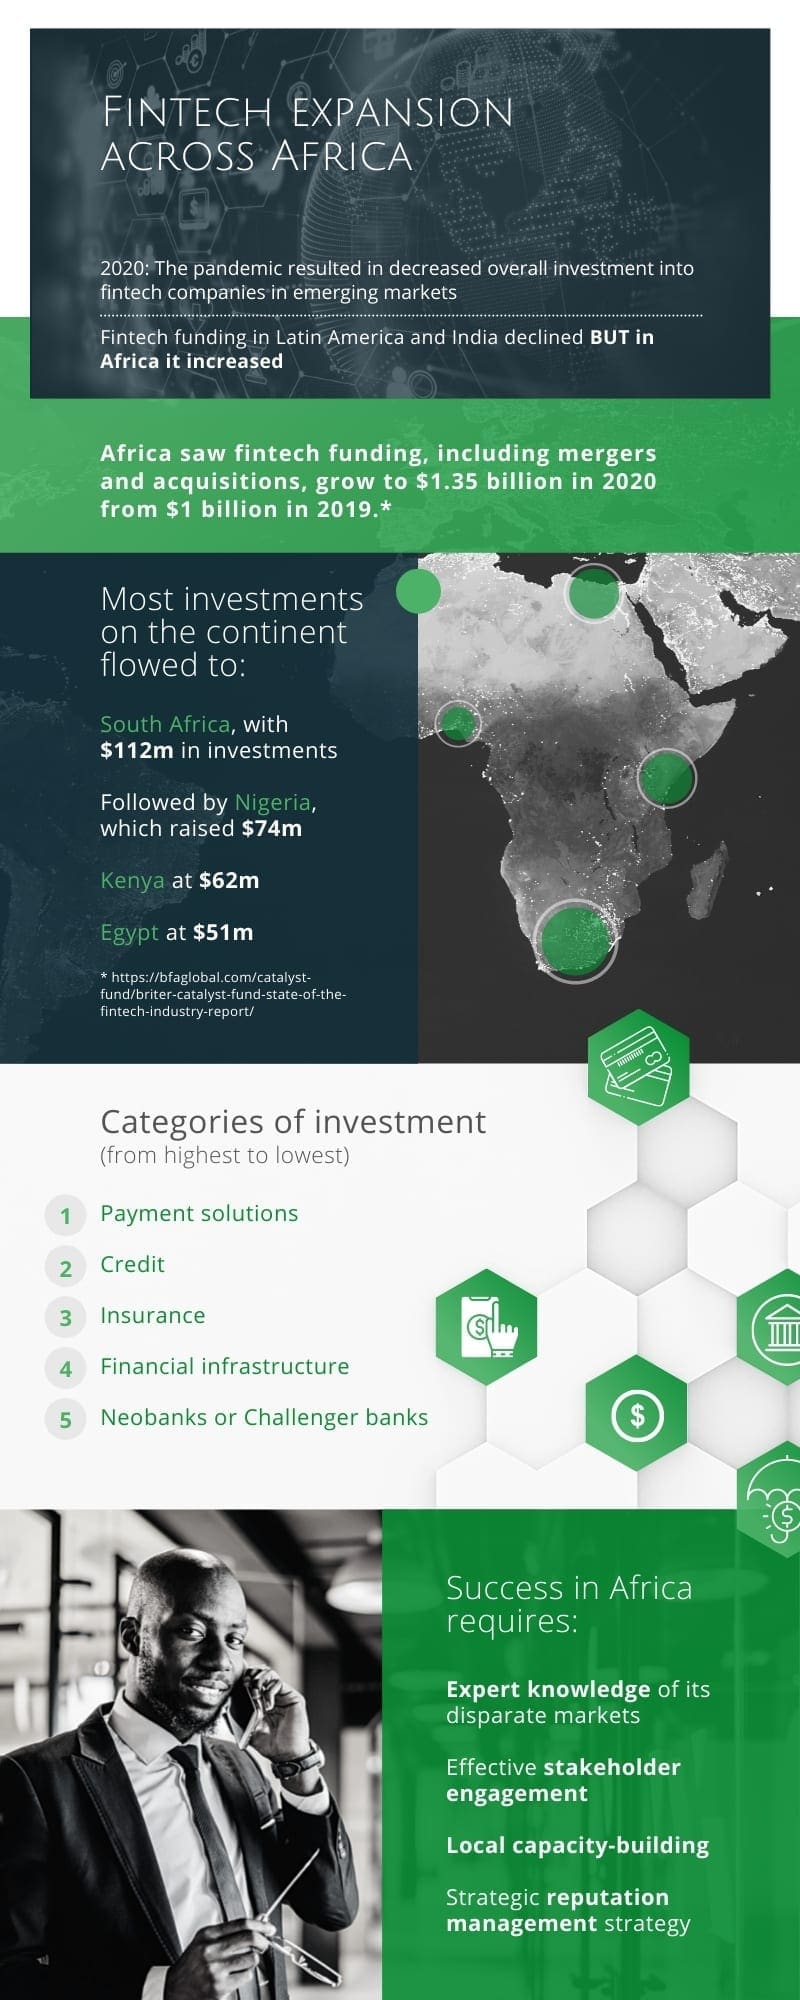 Fintech expansion in Africa infographic Oct2021 1